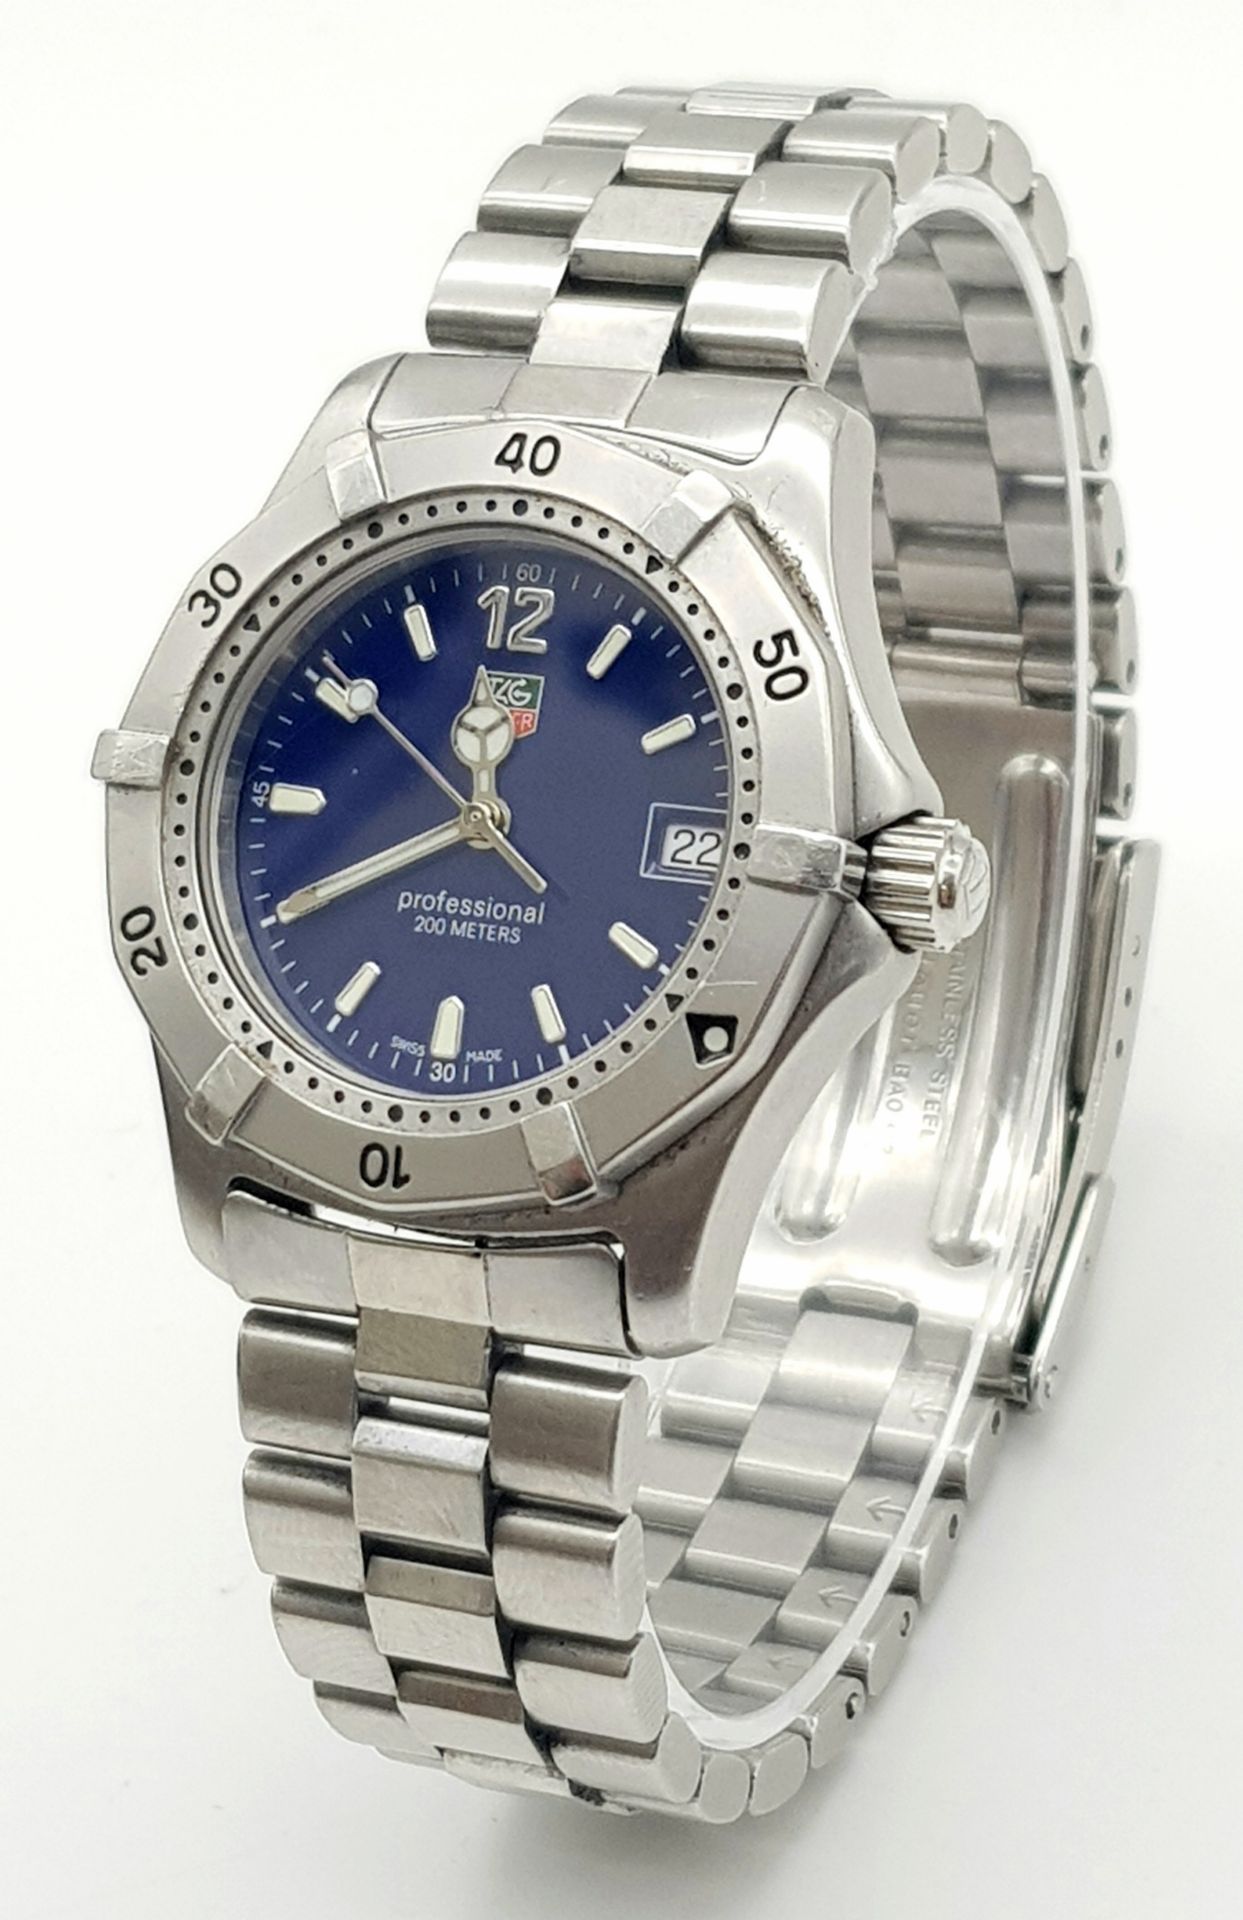 A TAG-HEUER LADIES PROFESSIONAL STAINLESS STEEL WATCH WITH AMAZING NAVY BLUE DIAL . 32mm COMES IN